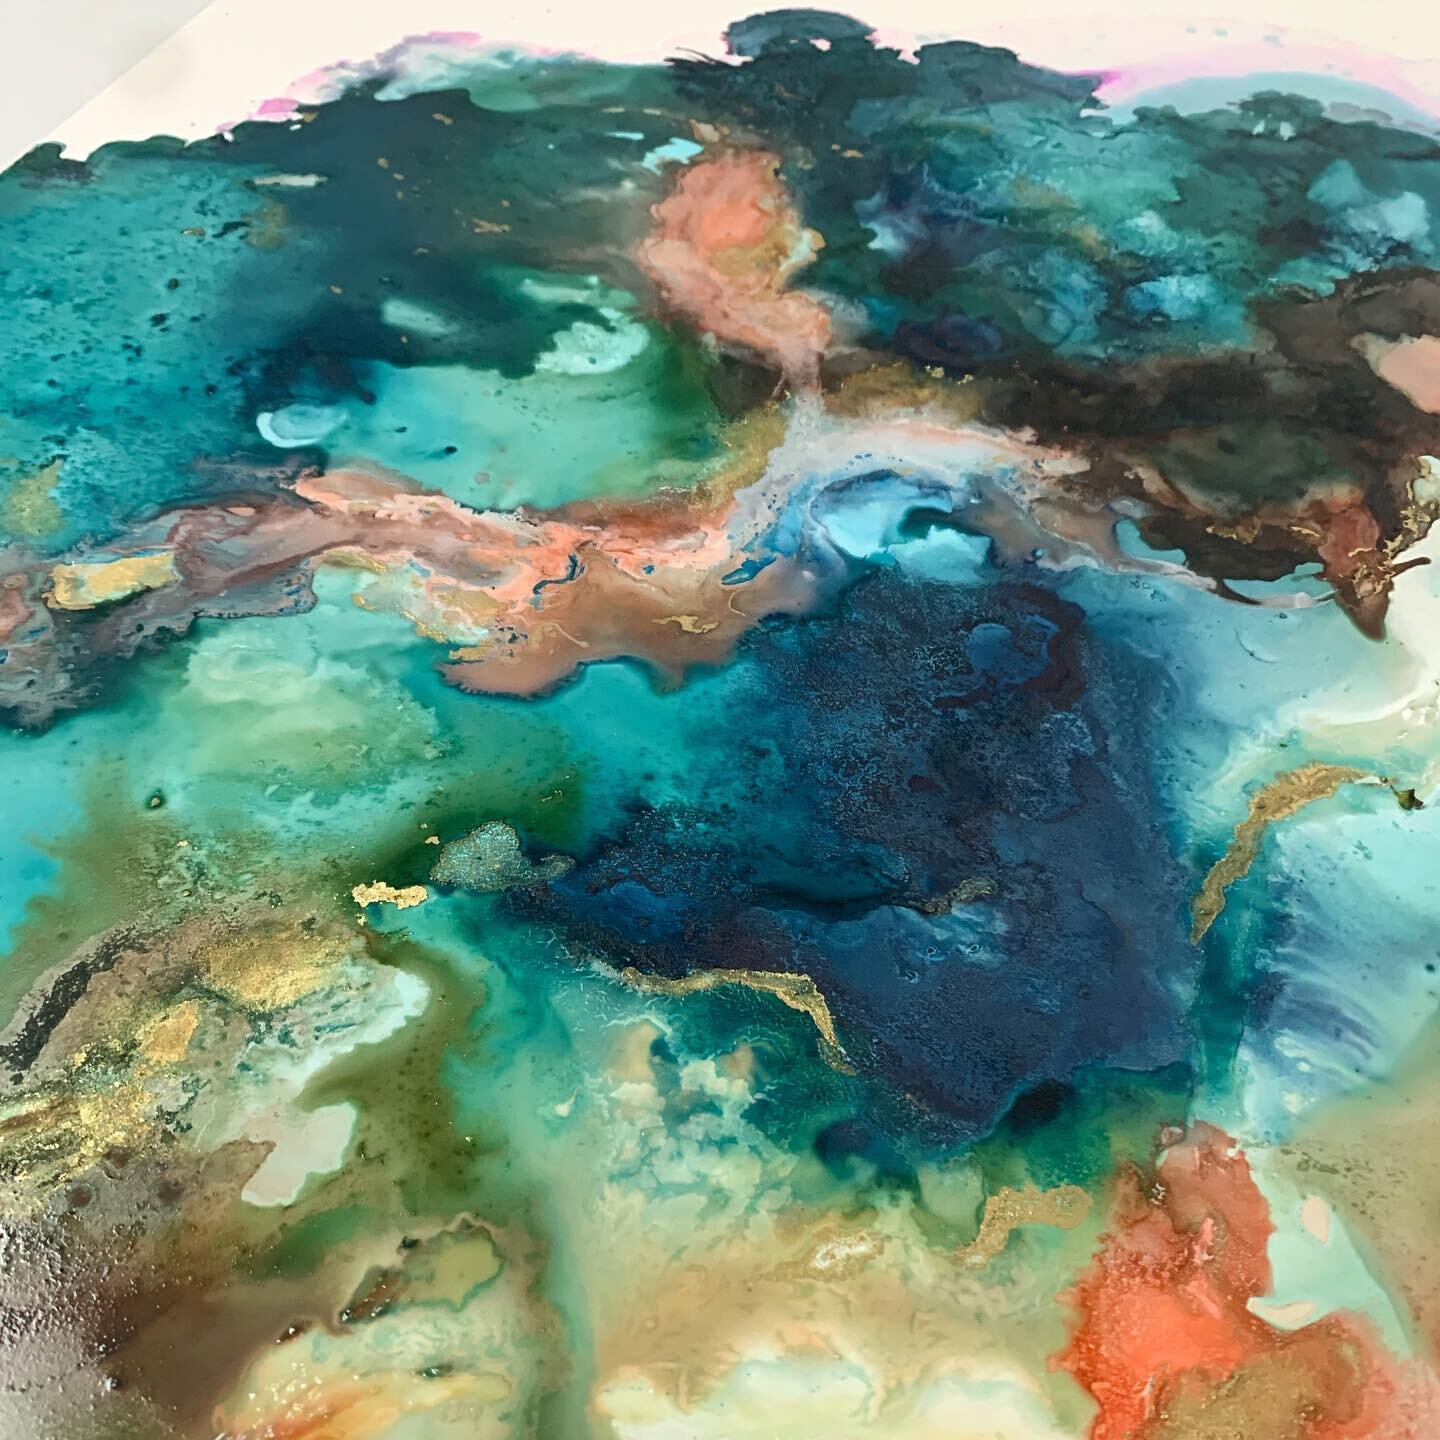 Inspired by our beautiful walk this morning. The deep stormy sea blues and sandy peachy pinks play so well together. 🌊 

#gowiththeflow #flowart #artforthesoul #abstractart #artfortheheart #abstractflow #artastherapy #artmakesmehappy  #alcoholinks #